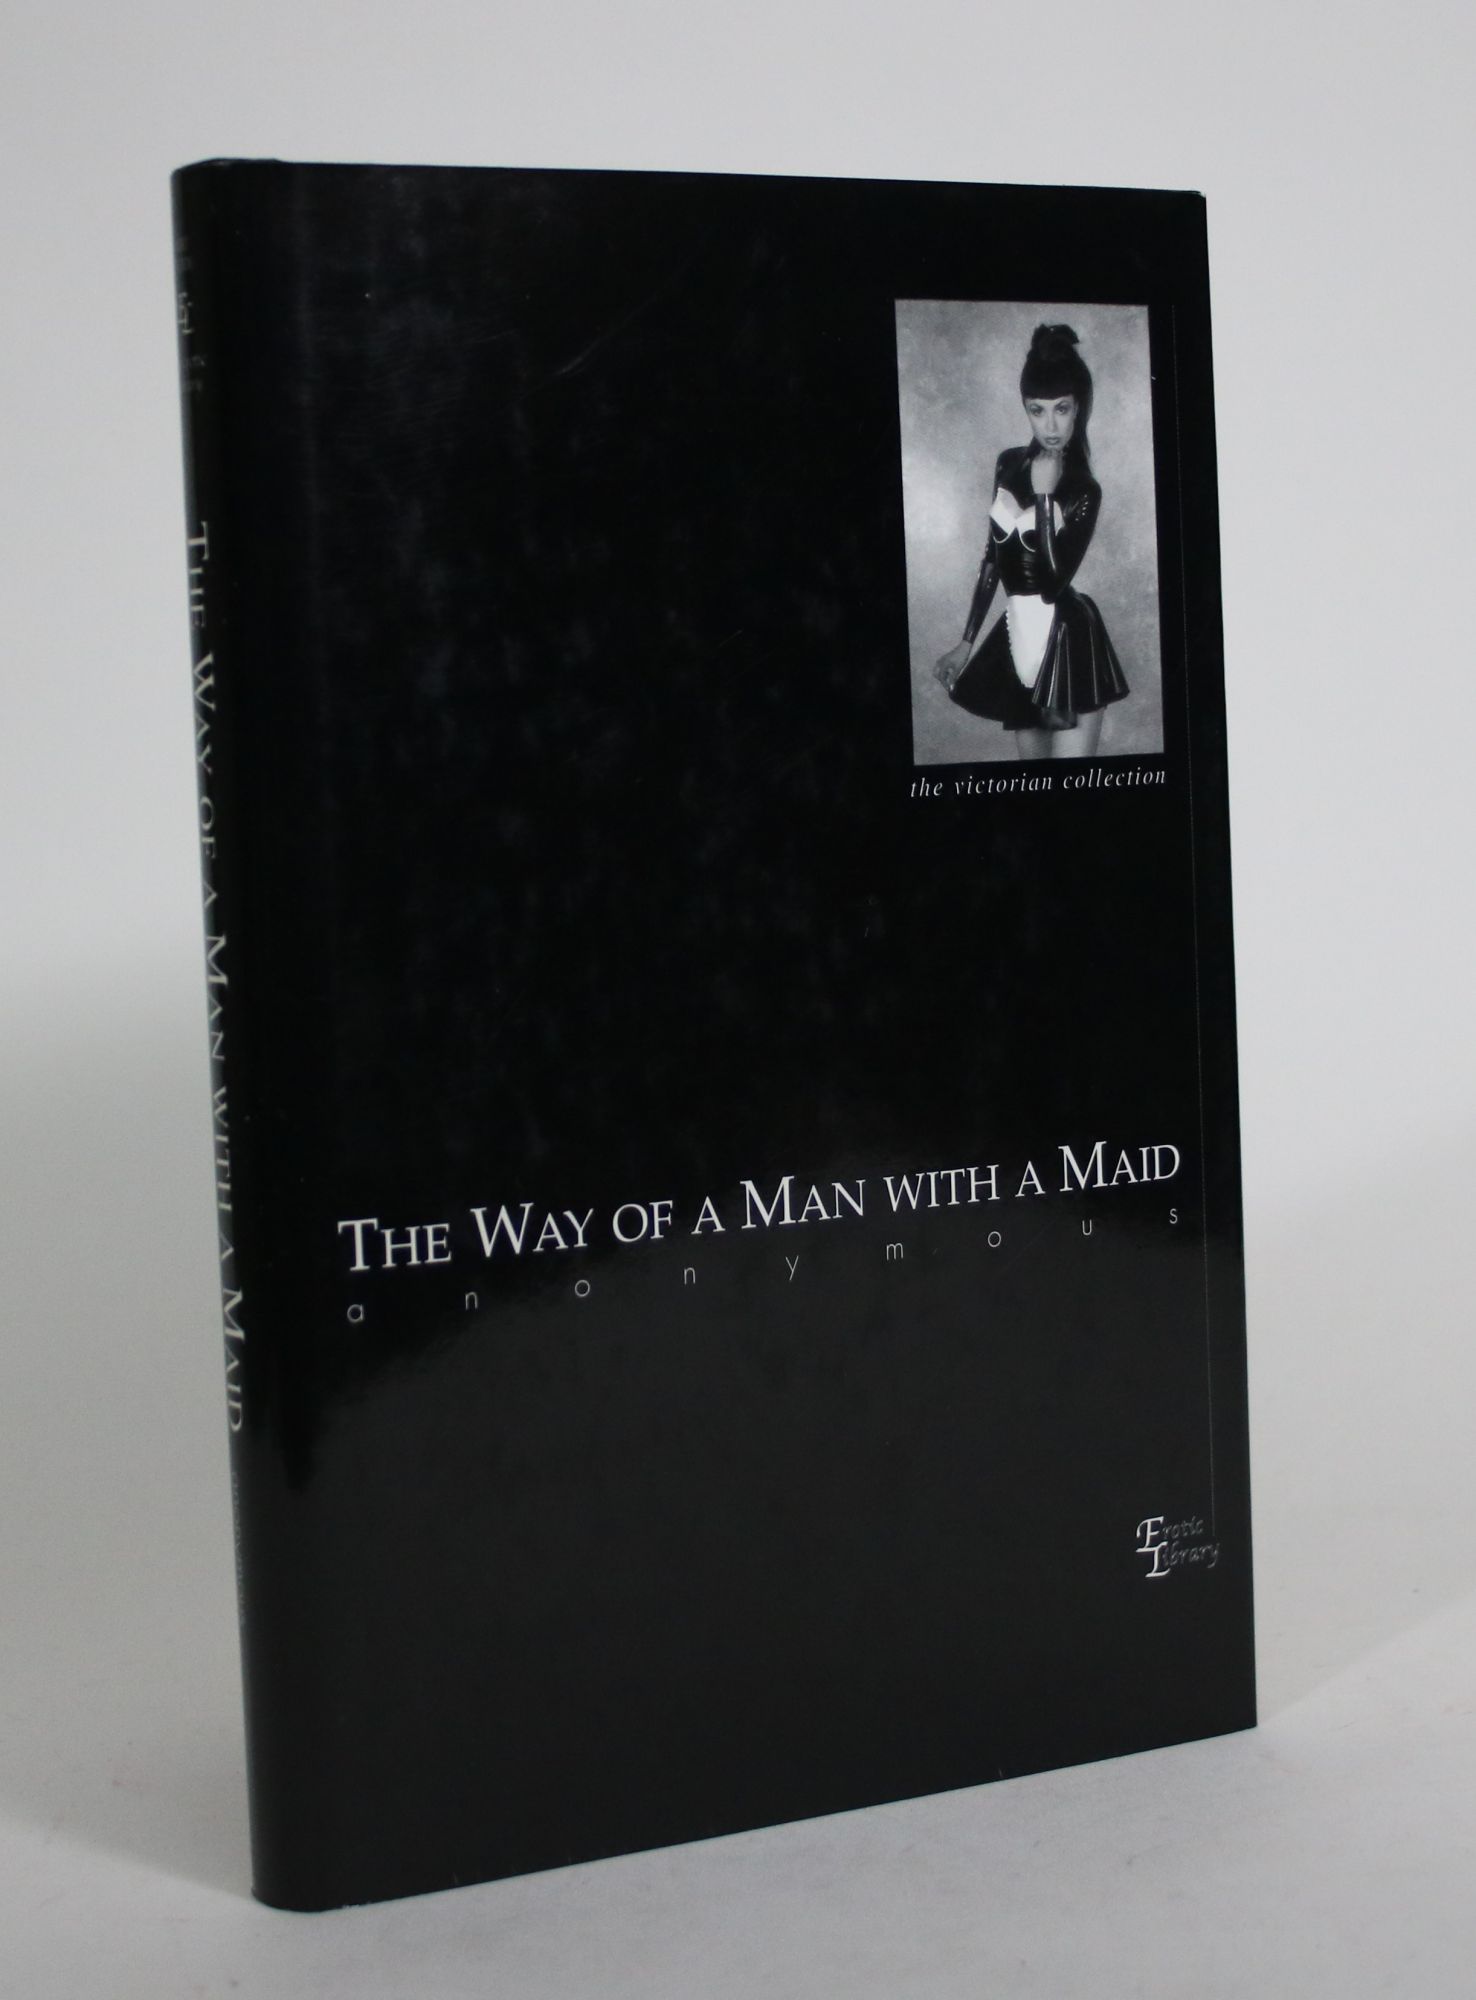 The Way of a Man with a Maid - Anonymous